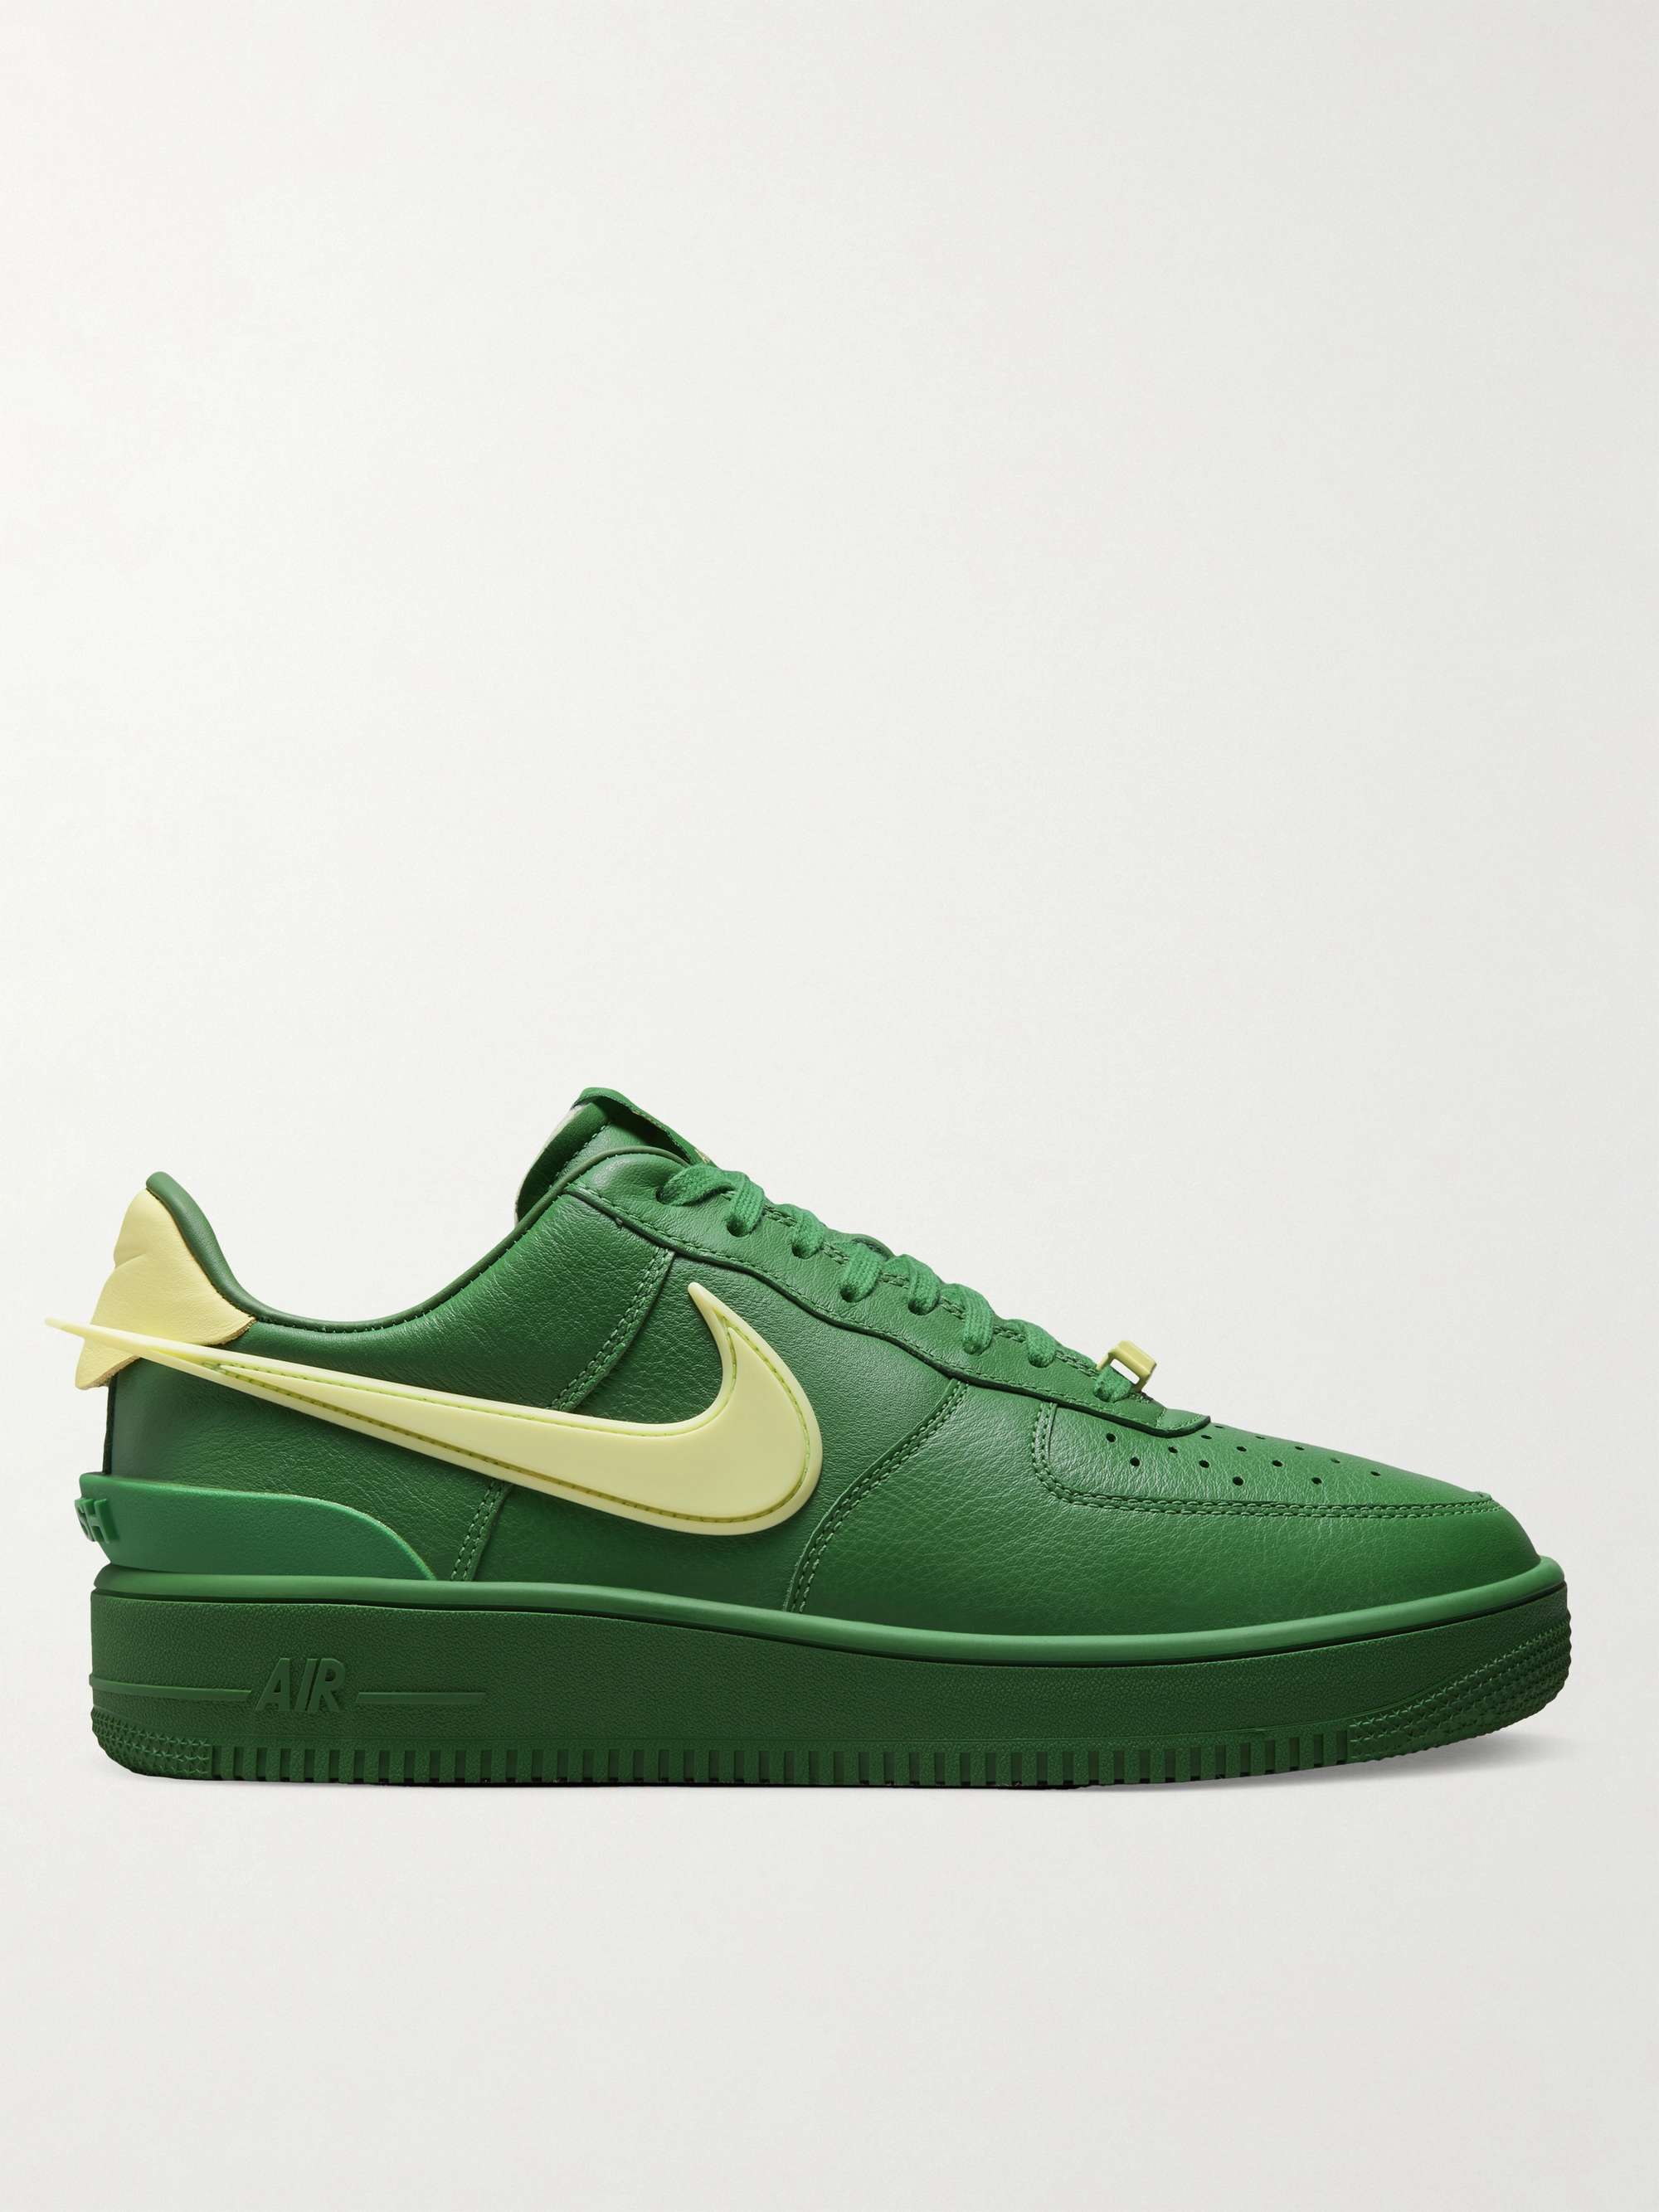 Green + AMBUSH Air Force 1 Rubber-Trimmed Leather Sneakers | NIKE | MR  PORTER